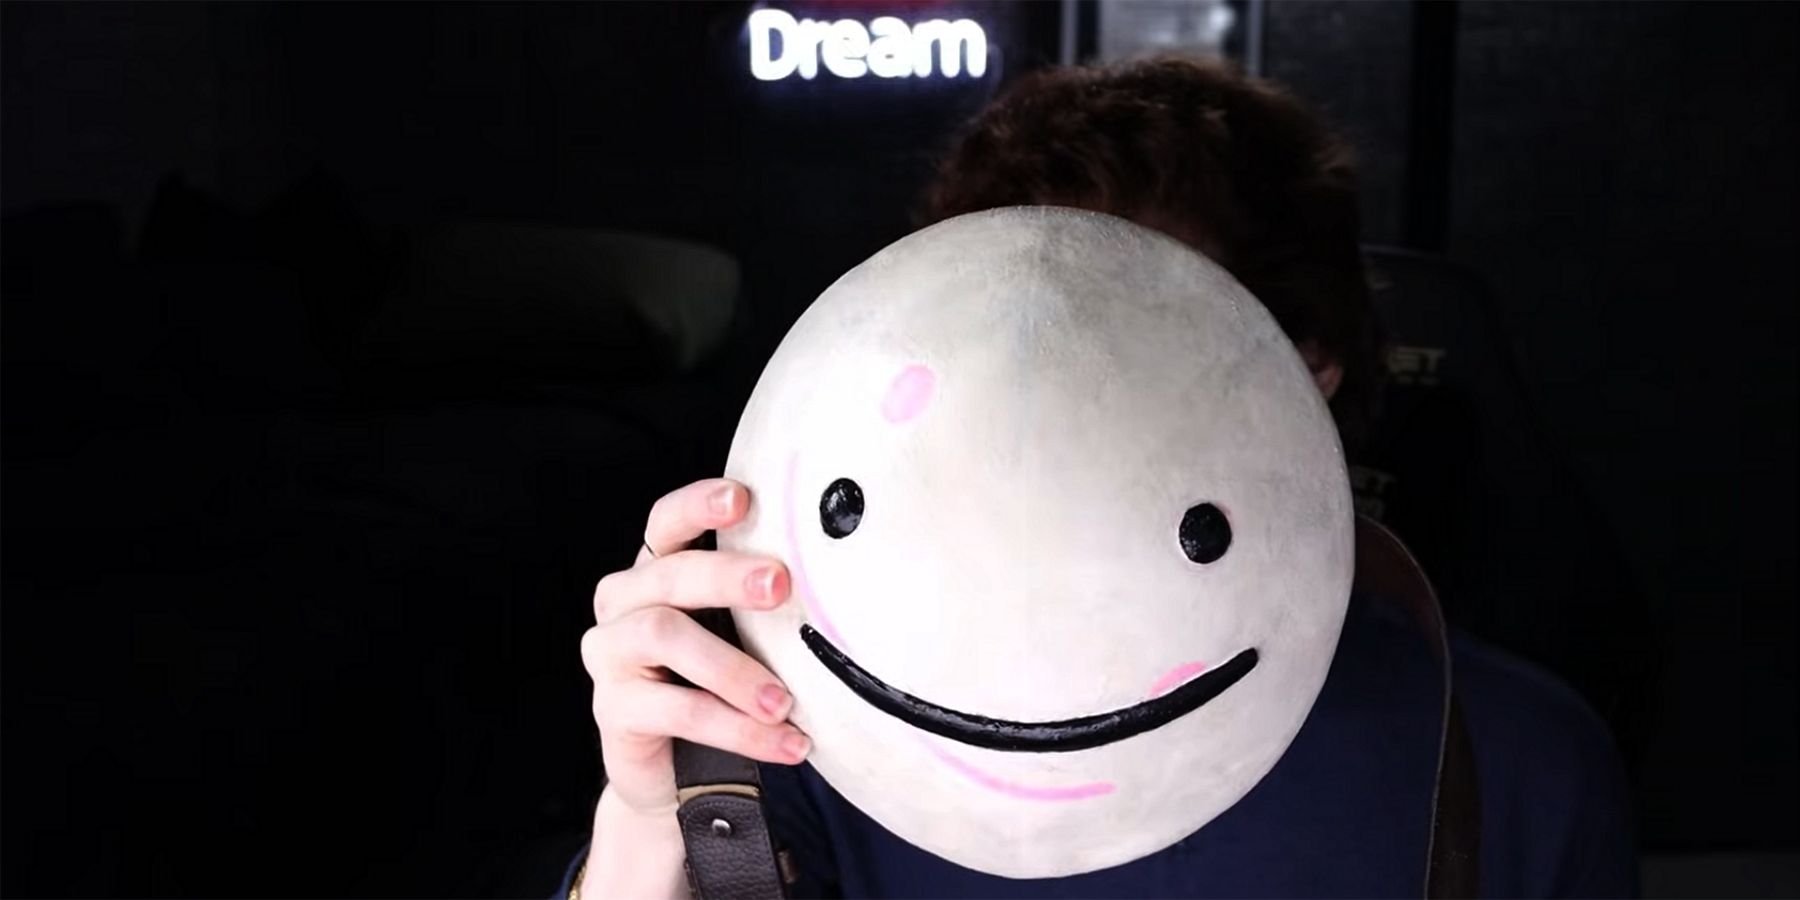 Over 1.5 Million People Watched Dream Face Reveal Premiere